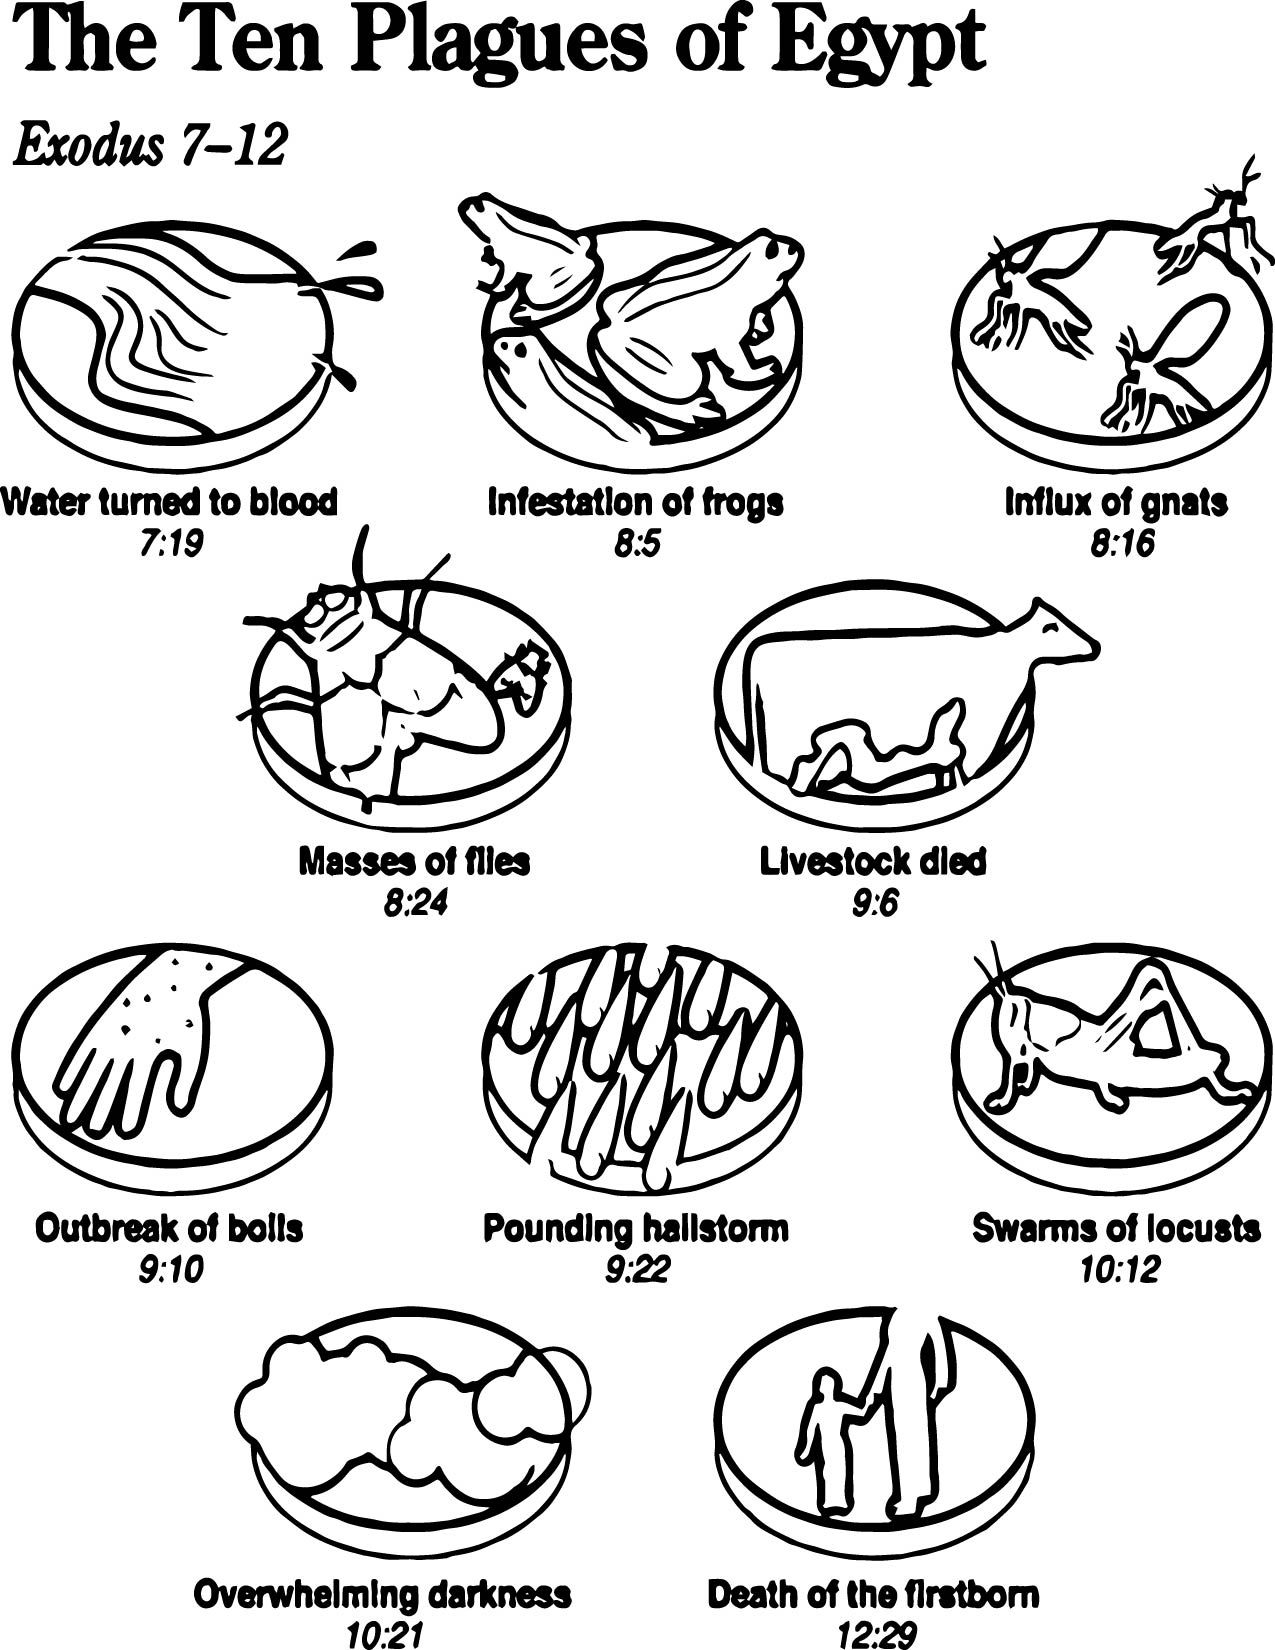 Cool The Ten Plagues Of Egypt Coloring Page Ten Plagues Plagues Of Egypt 10 Plagues